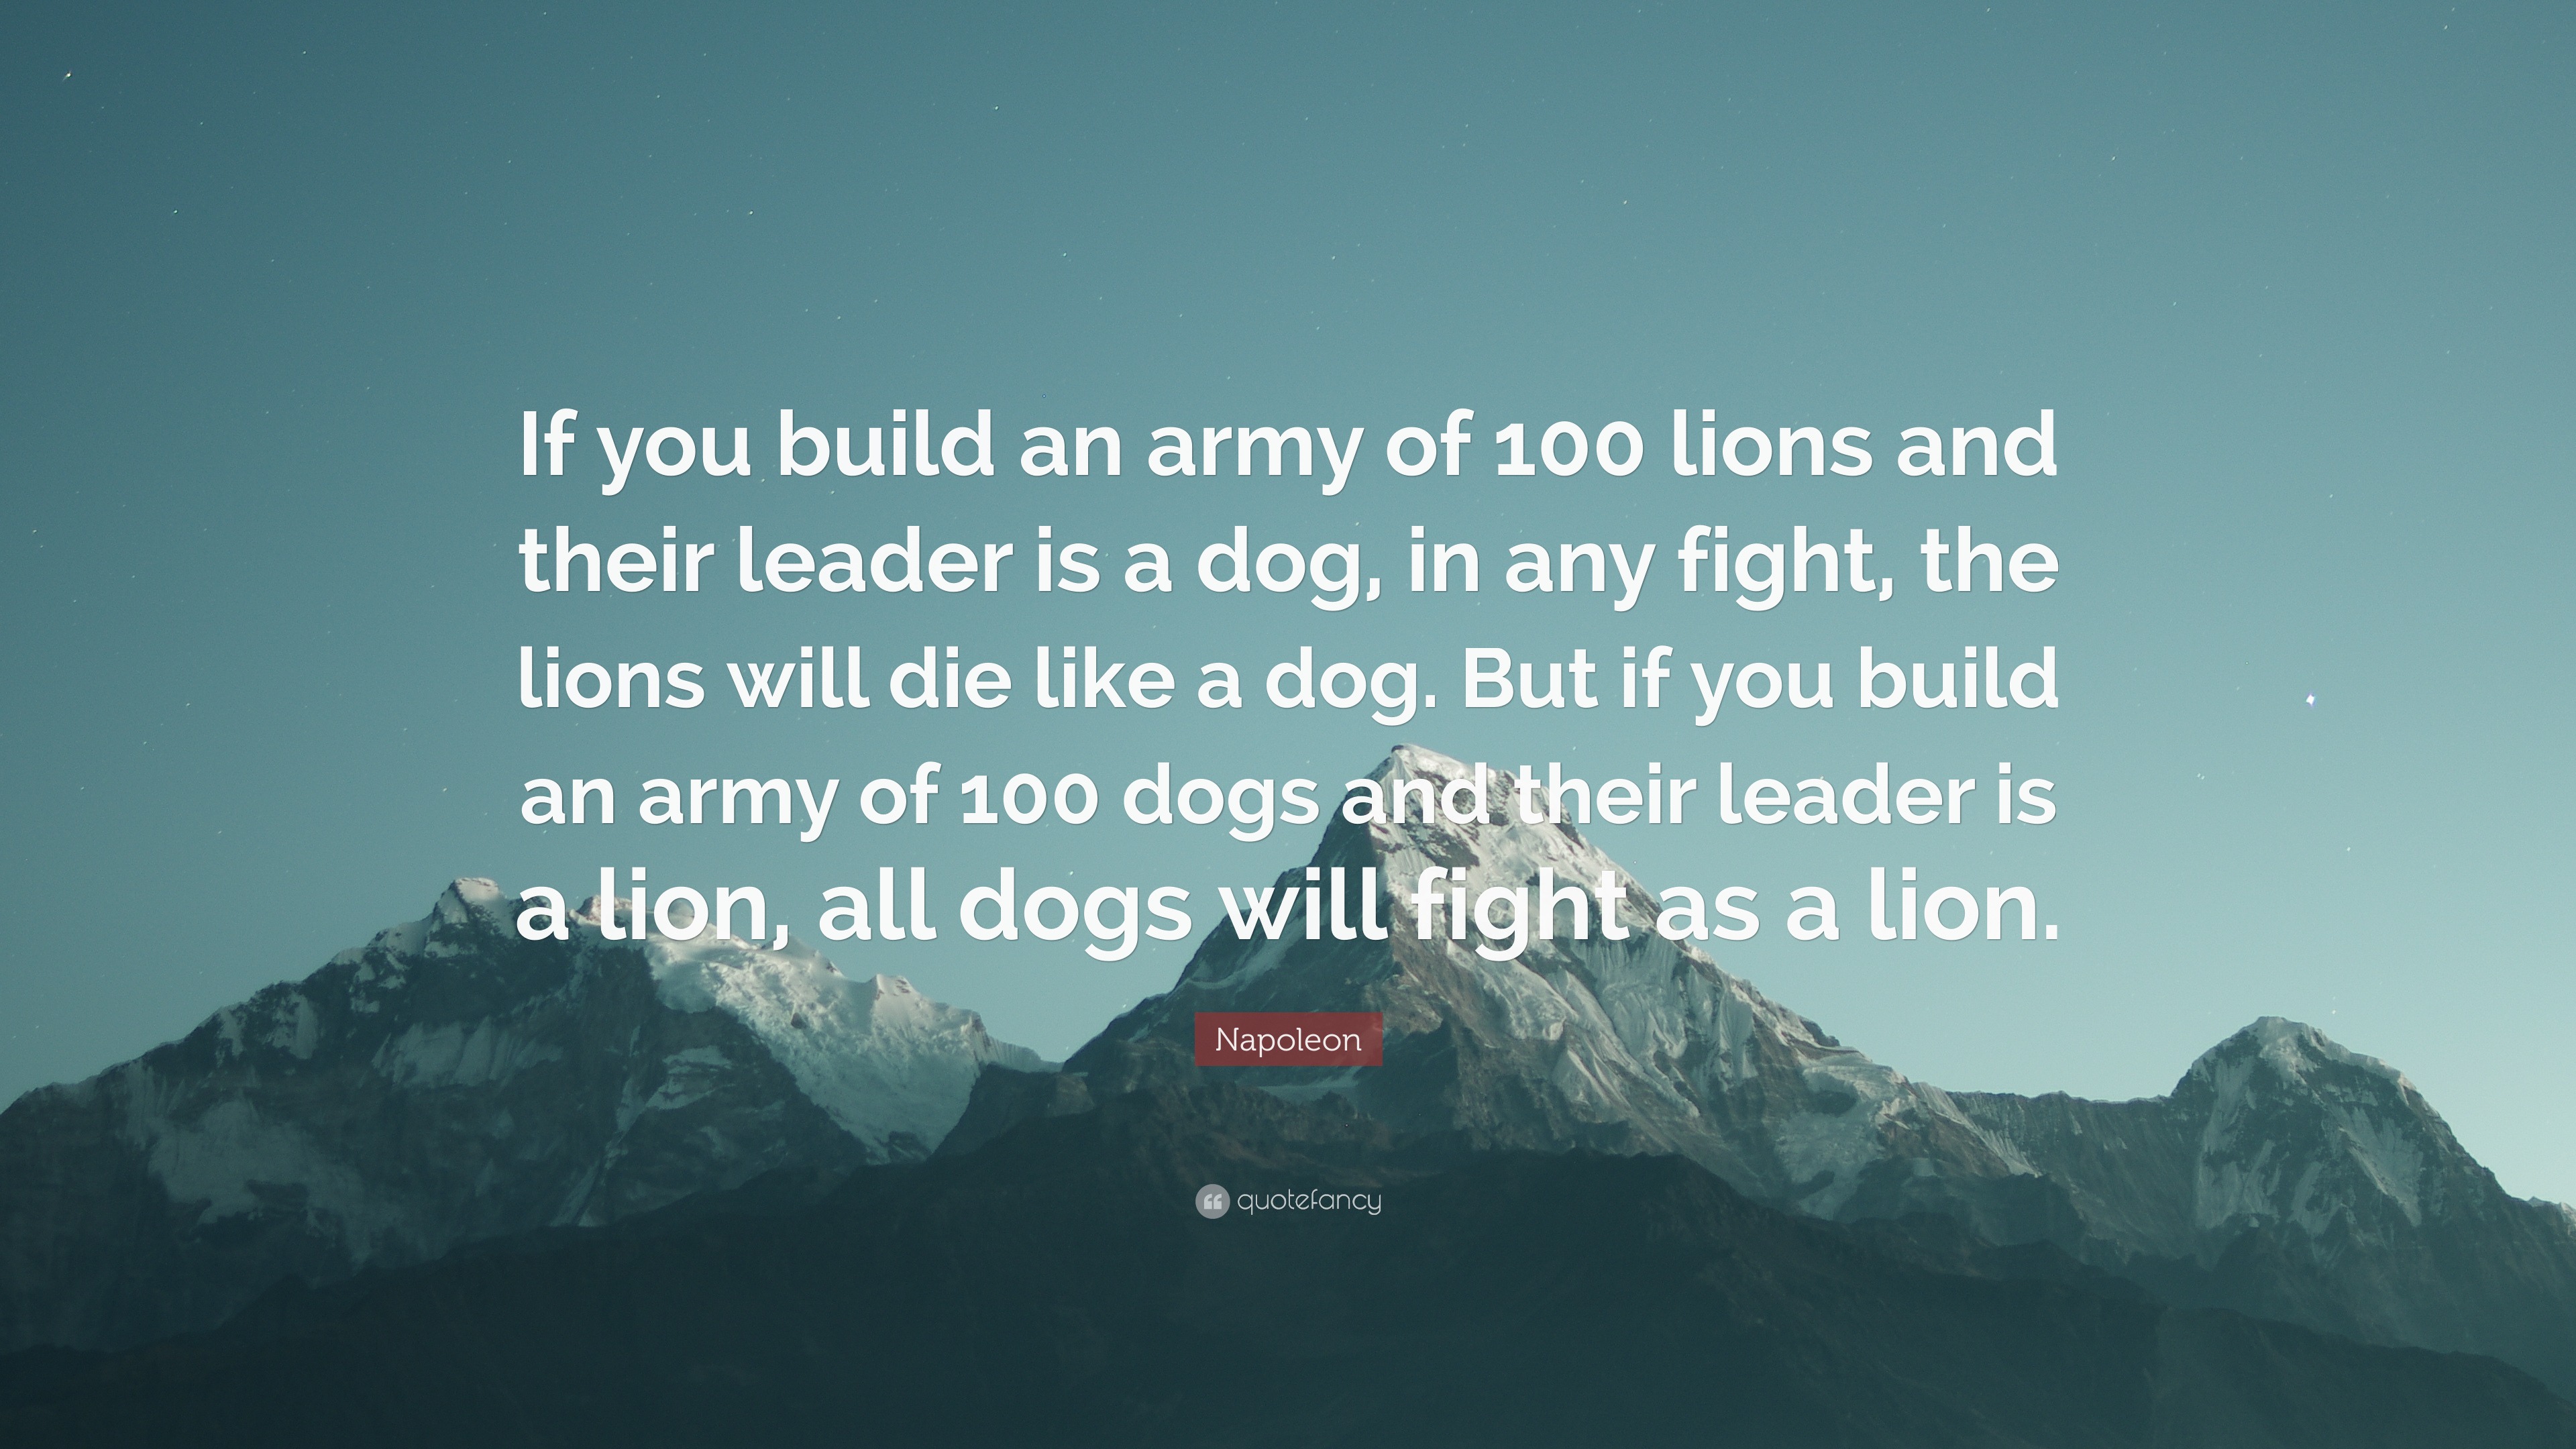 Napoleon Quote: “If you build an army of 100 lions and their leader is